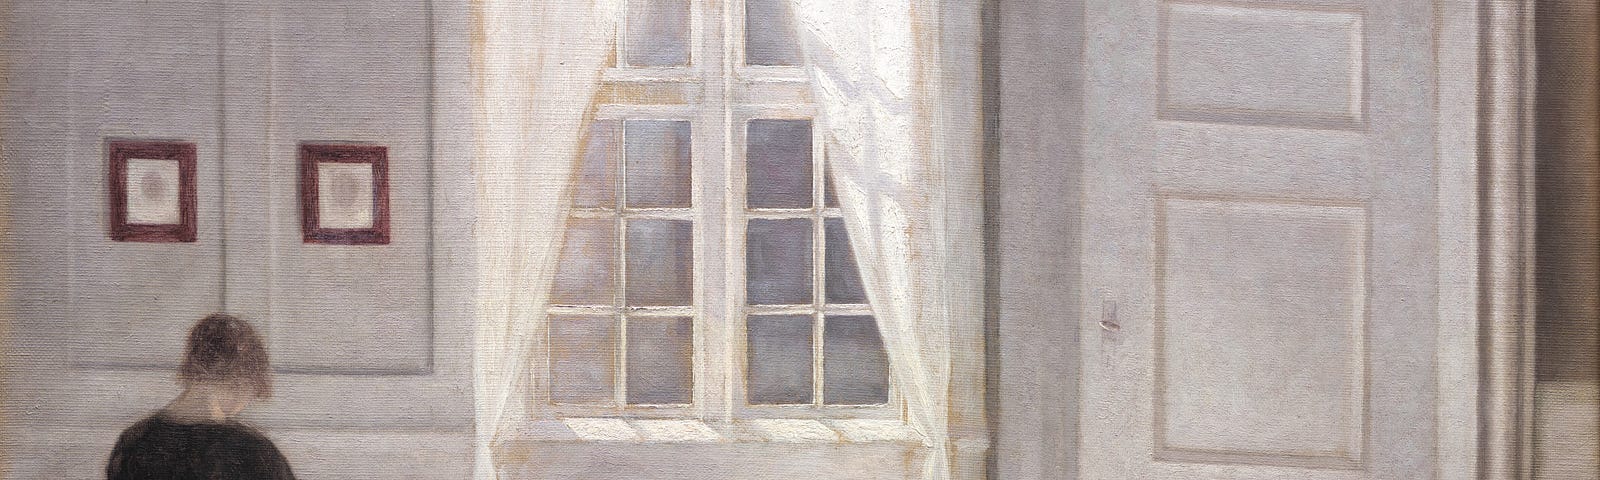 A painting of a woman sat at a desk next to a window, sunlight falls into the room and across the floor beside her. Painted by Vilhelm Hammershøi